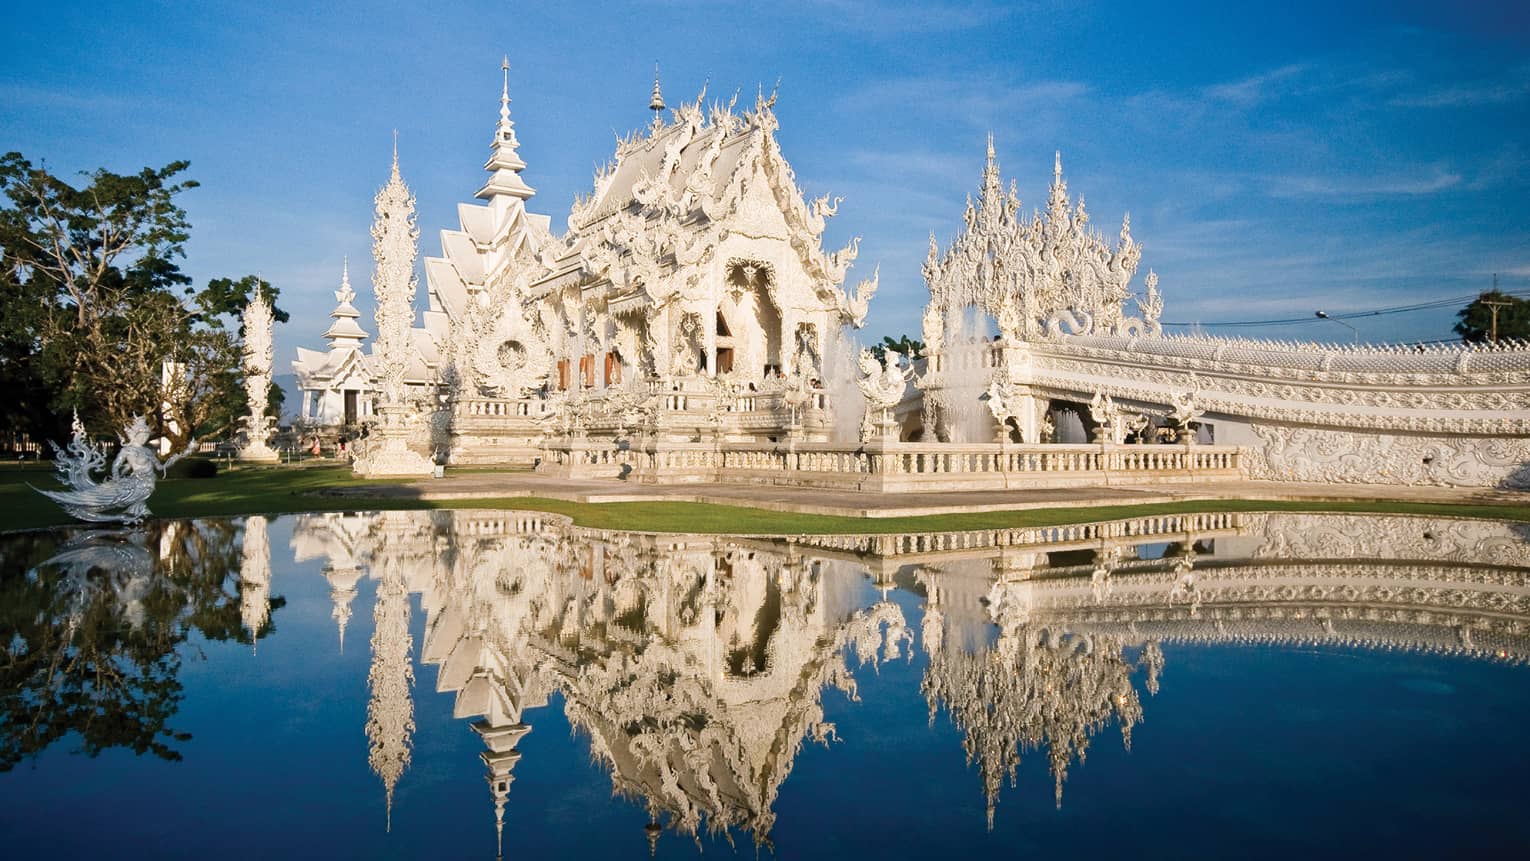 An ornate white castle reflecting in a pond